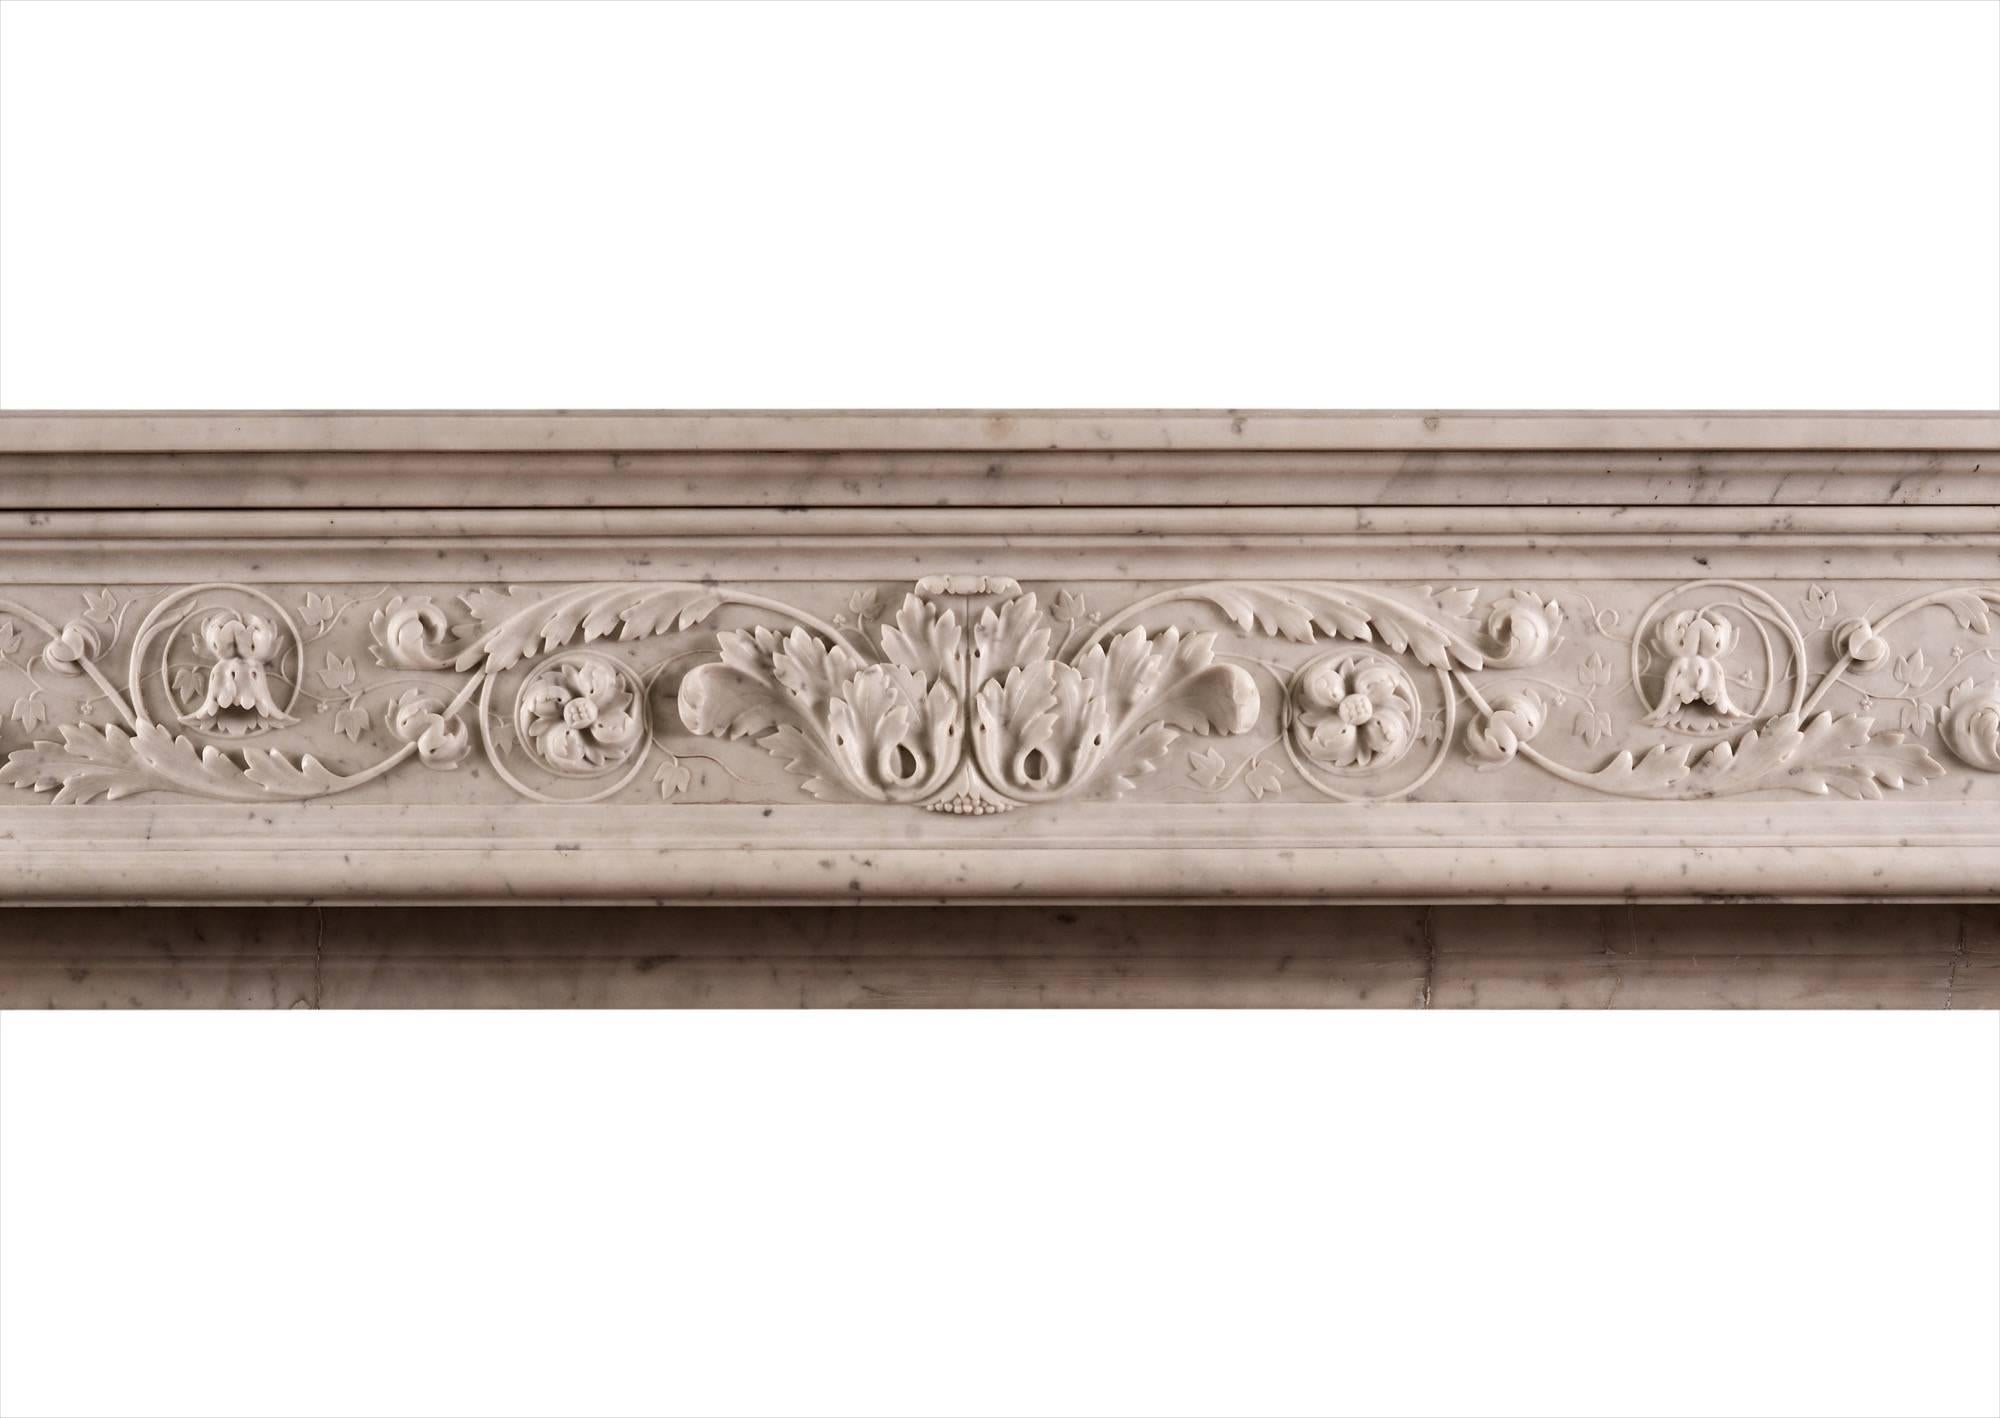 A fine quality Louis XVI style fireplace in Italian Carrara marble. The shaped jambs with carved acanthus leaves and scrollwork, surmounted by carved square paterae. The shaped, frieze with foliage, bellflowers and fine leaf work throughout. Paneled